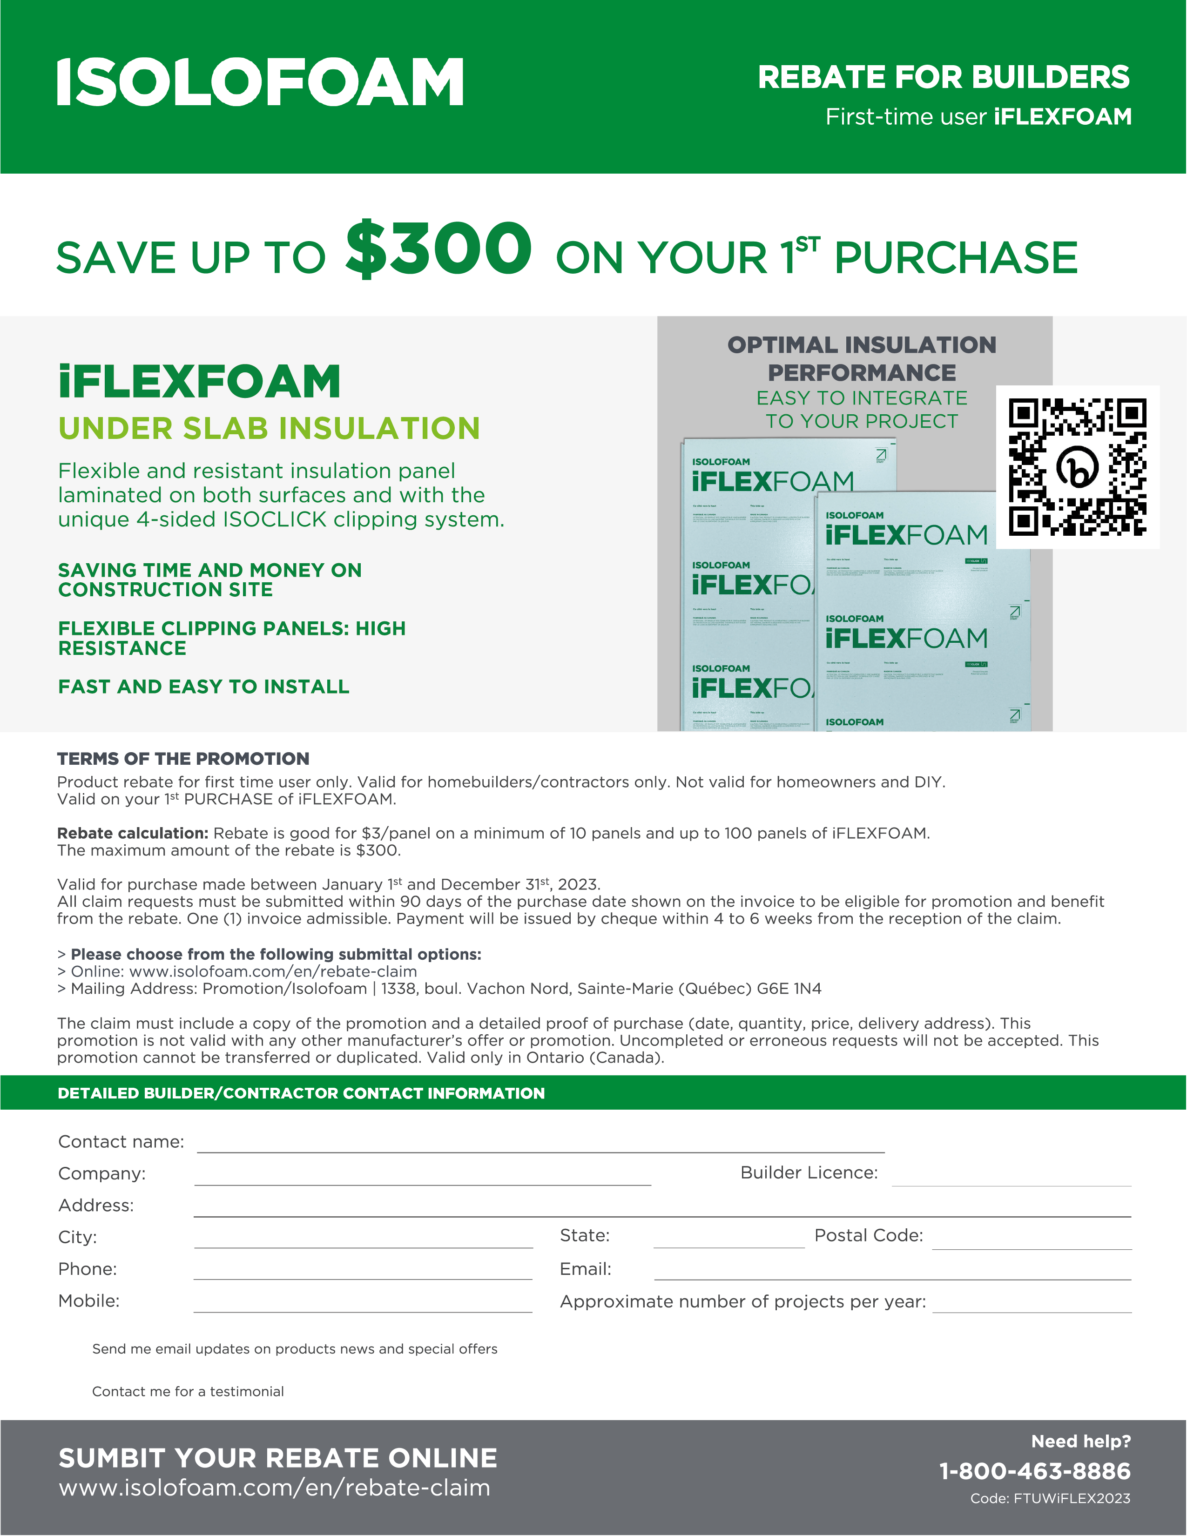 isolofoam-rebates-for-first-time-users-isolofoam